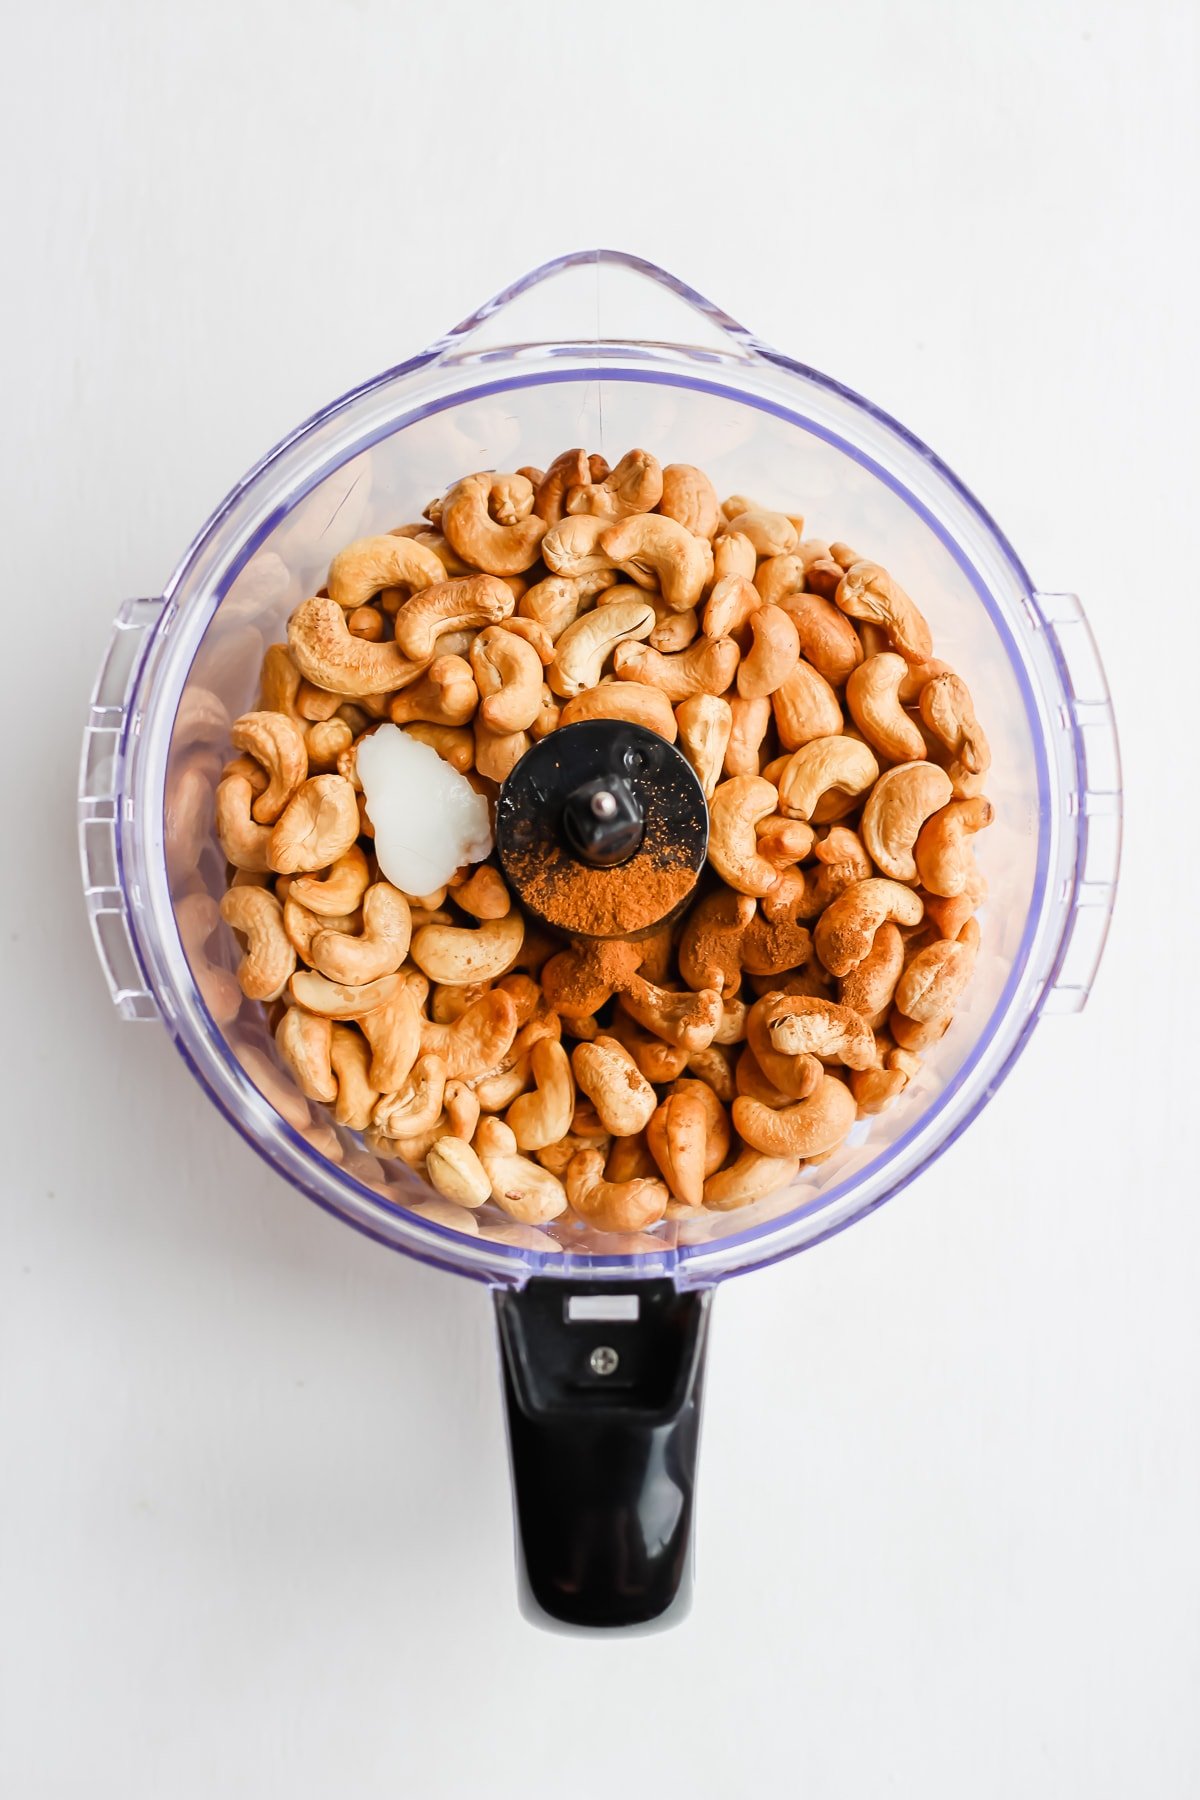 Top shot of a food processor with ingredients inside for cashew butter.